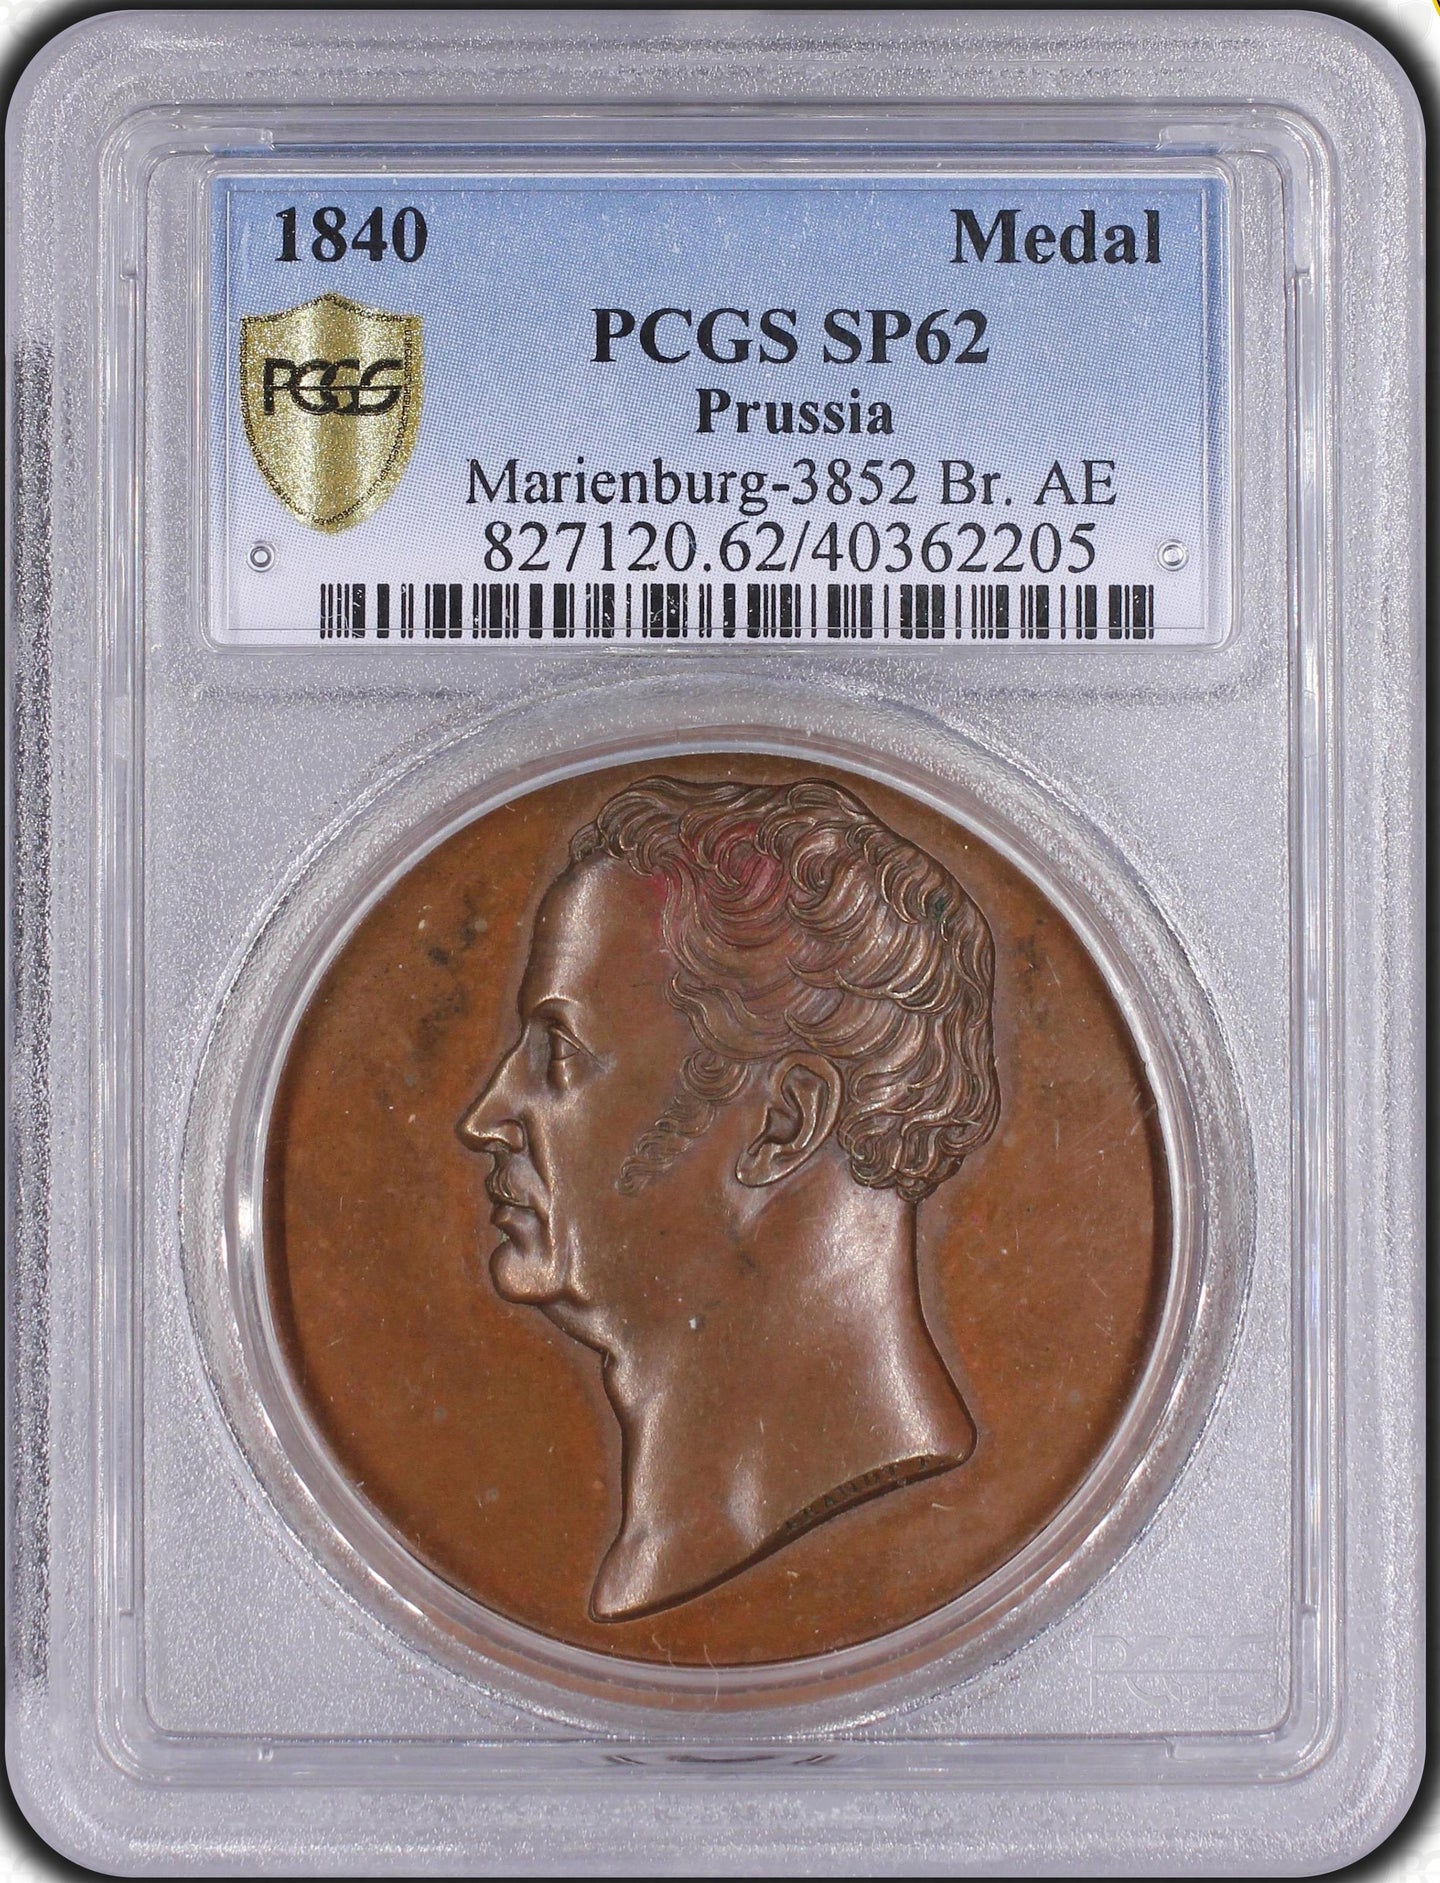 1840 German States Prussia Wilhelmina III Remembrance Medal - PCGS SP62 - Only one Graded Top Pop! Very Rare!